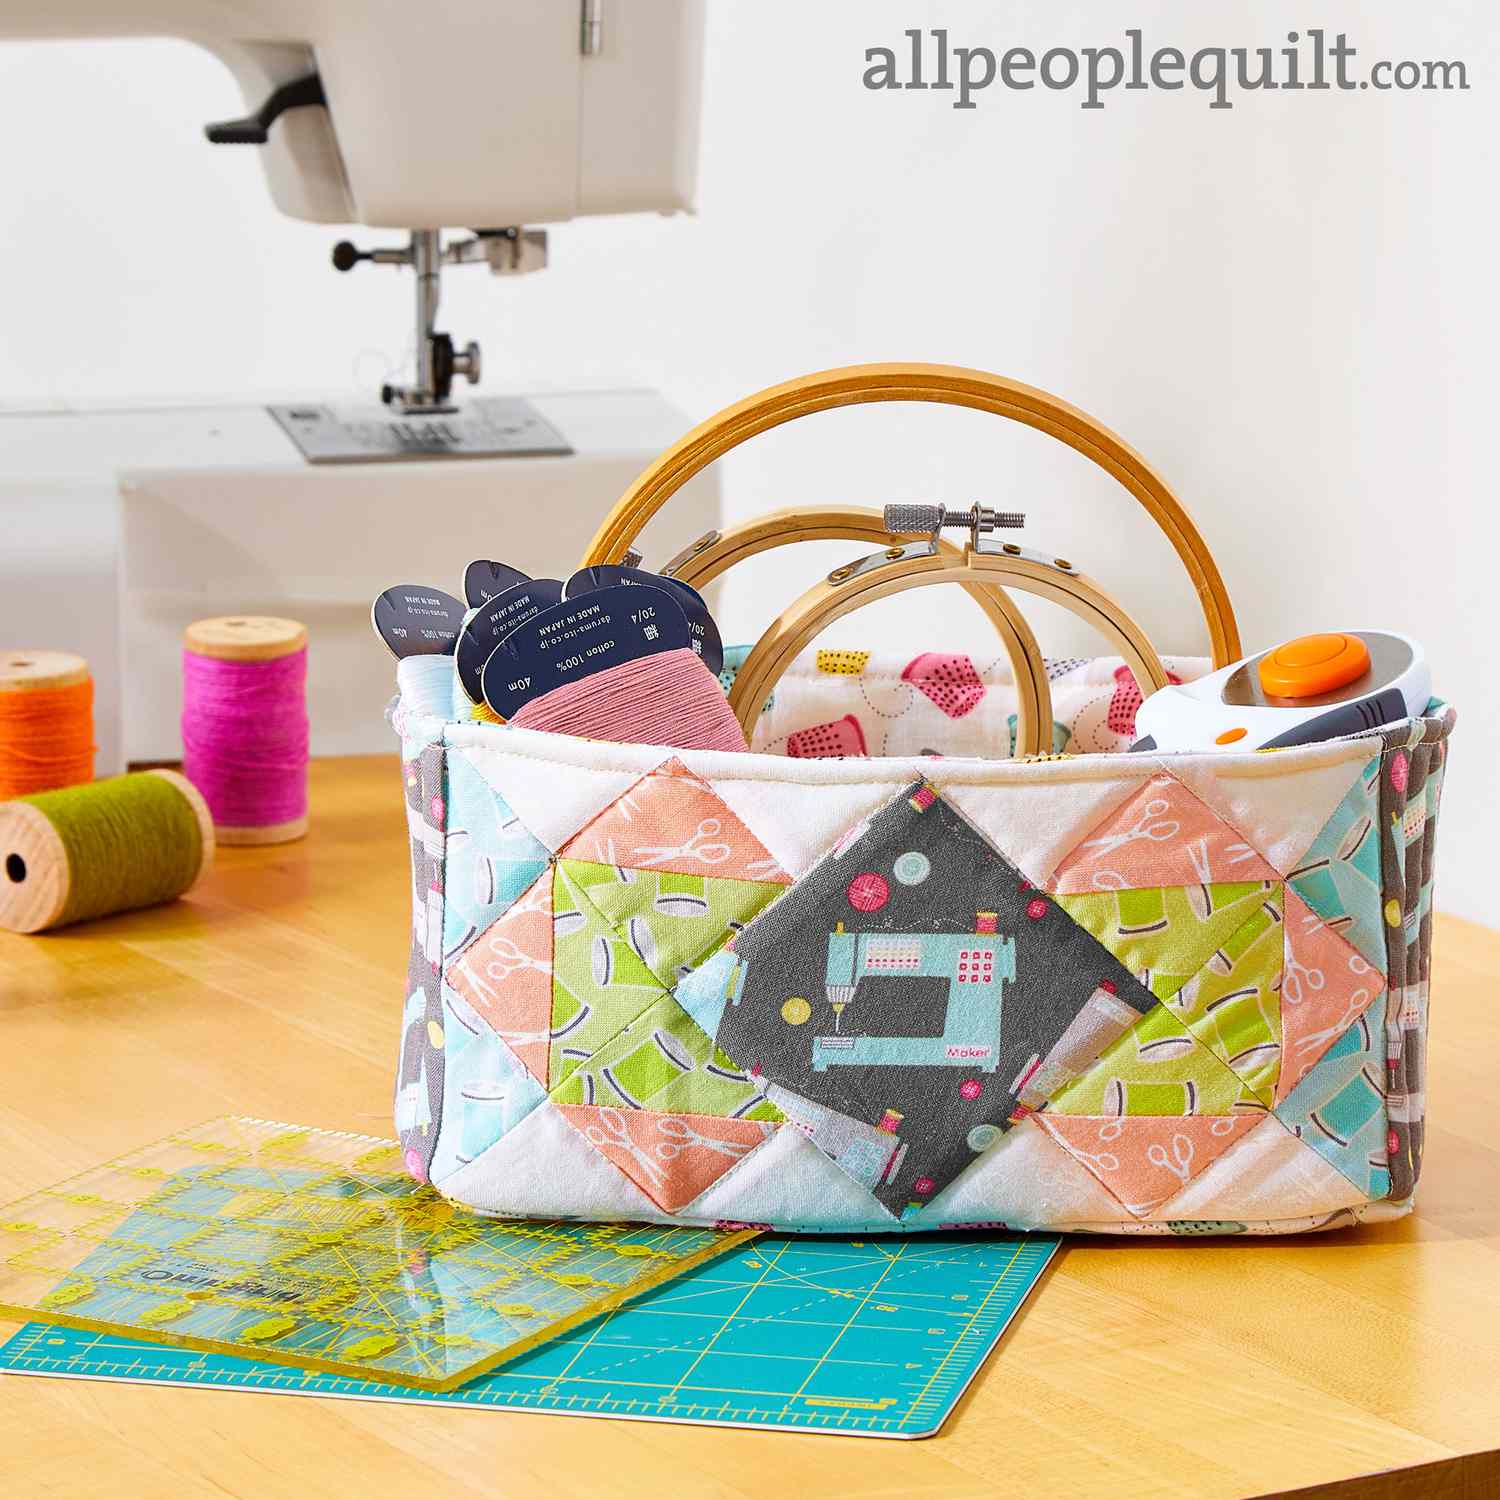 10 FREE DIY Sewing Gifts for Your Best Gal Pal - Suzy Quilts